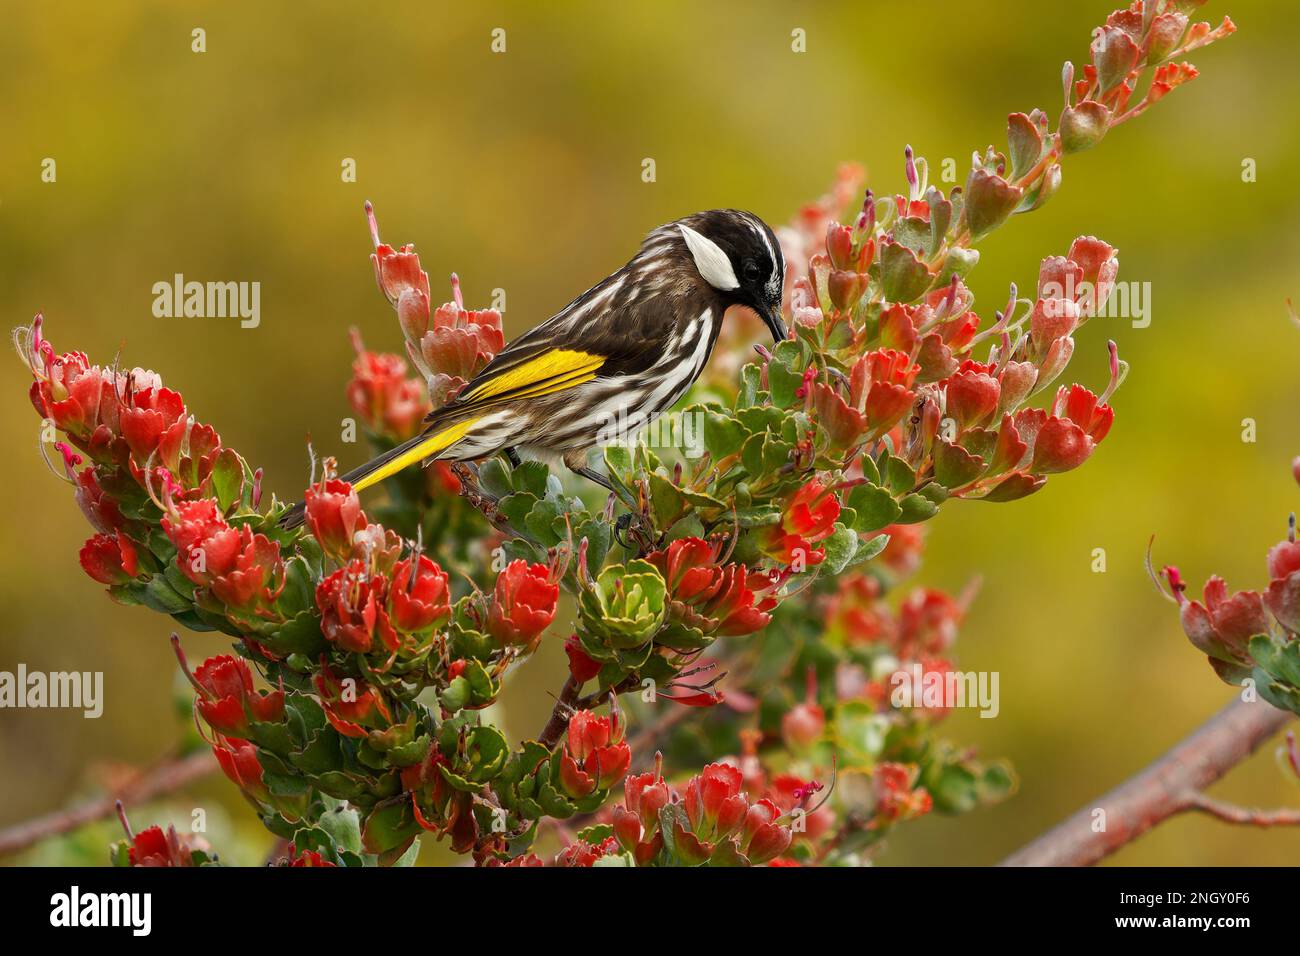 White-cheeked Honeyeater - Phylidonyris niger bird feeds on nectar on the red flower Adenanthos cuneatus, east coast and the south-west corner of Aust Stock Photo